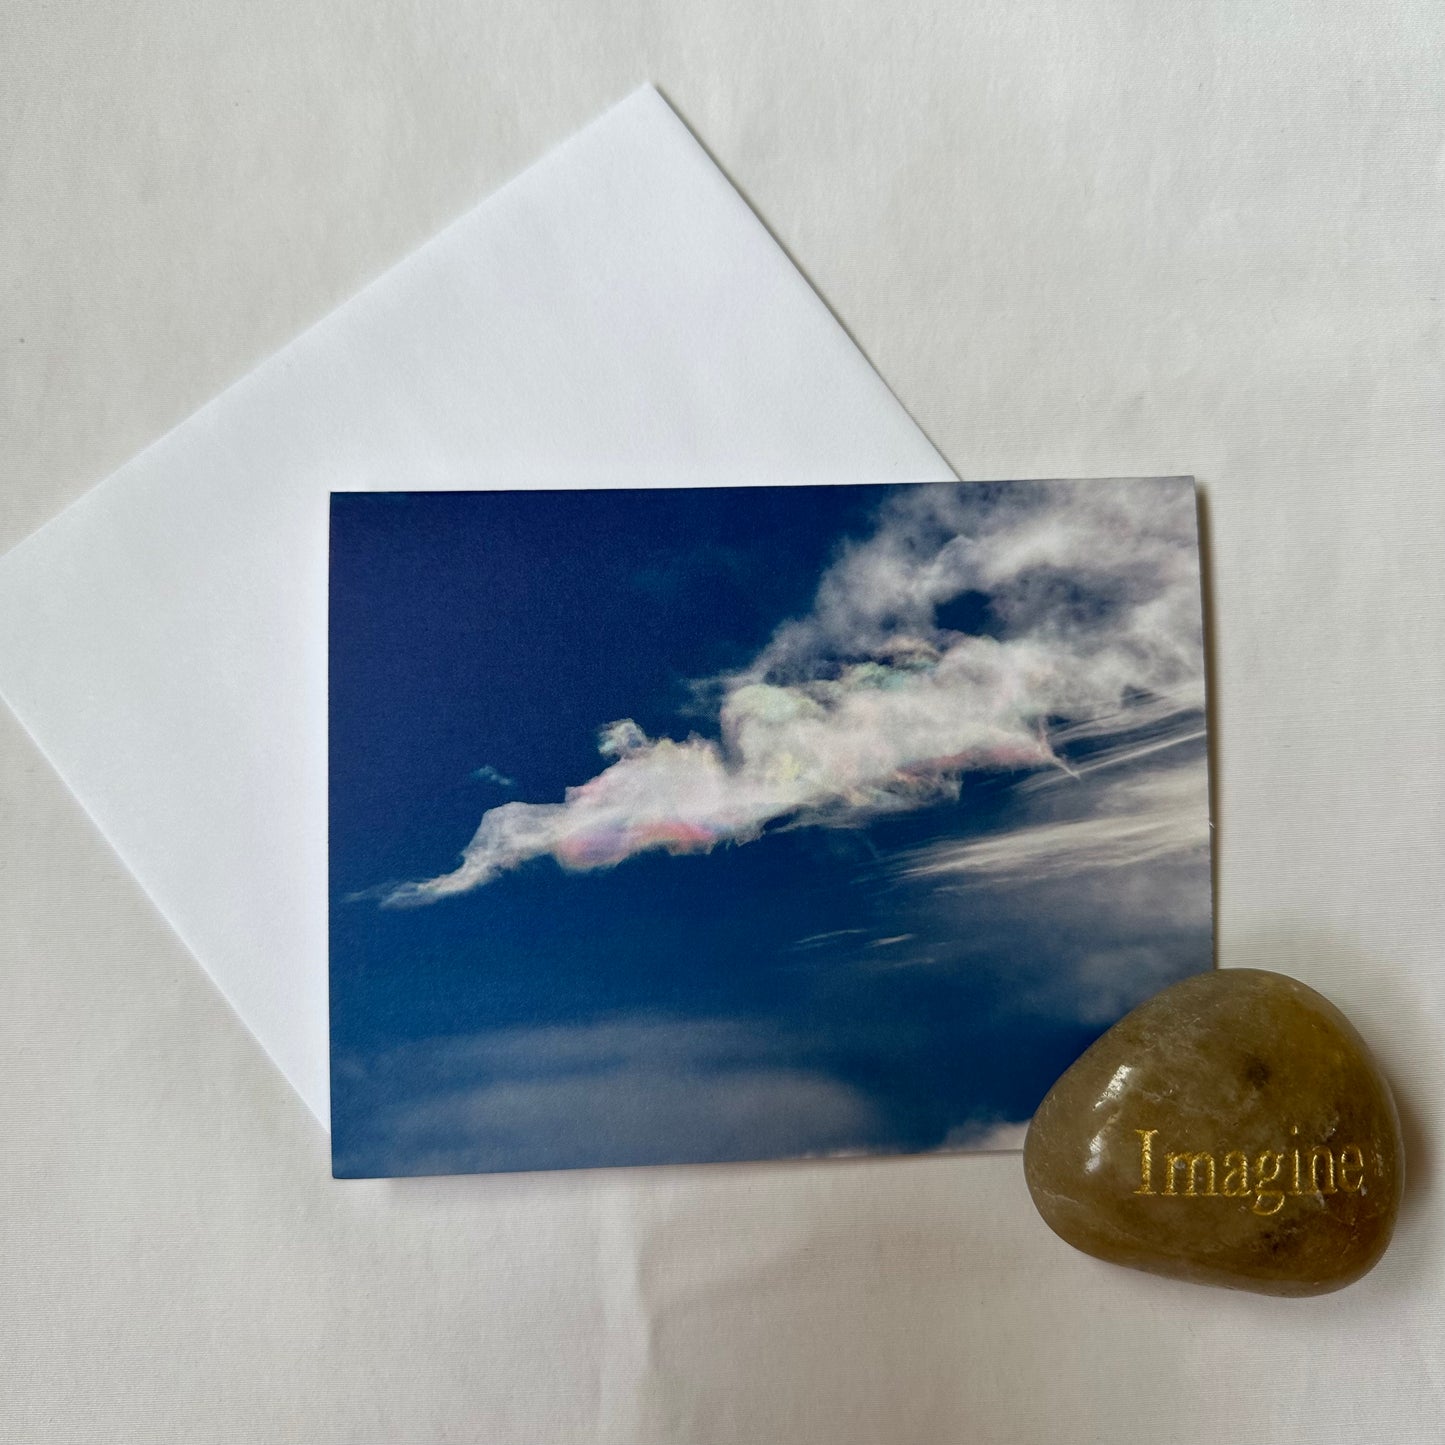 Angels in the Clouds Original Photography Greeting Card with White Envelope